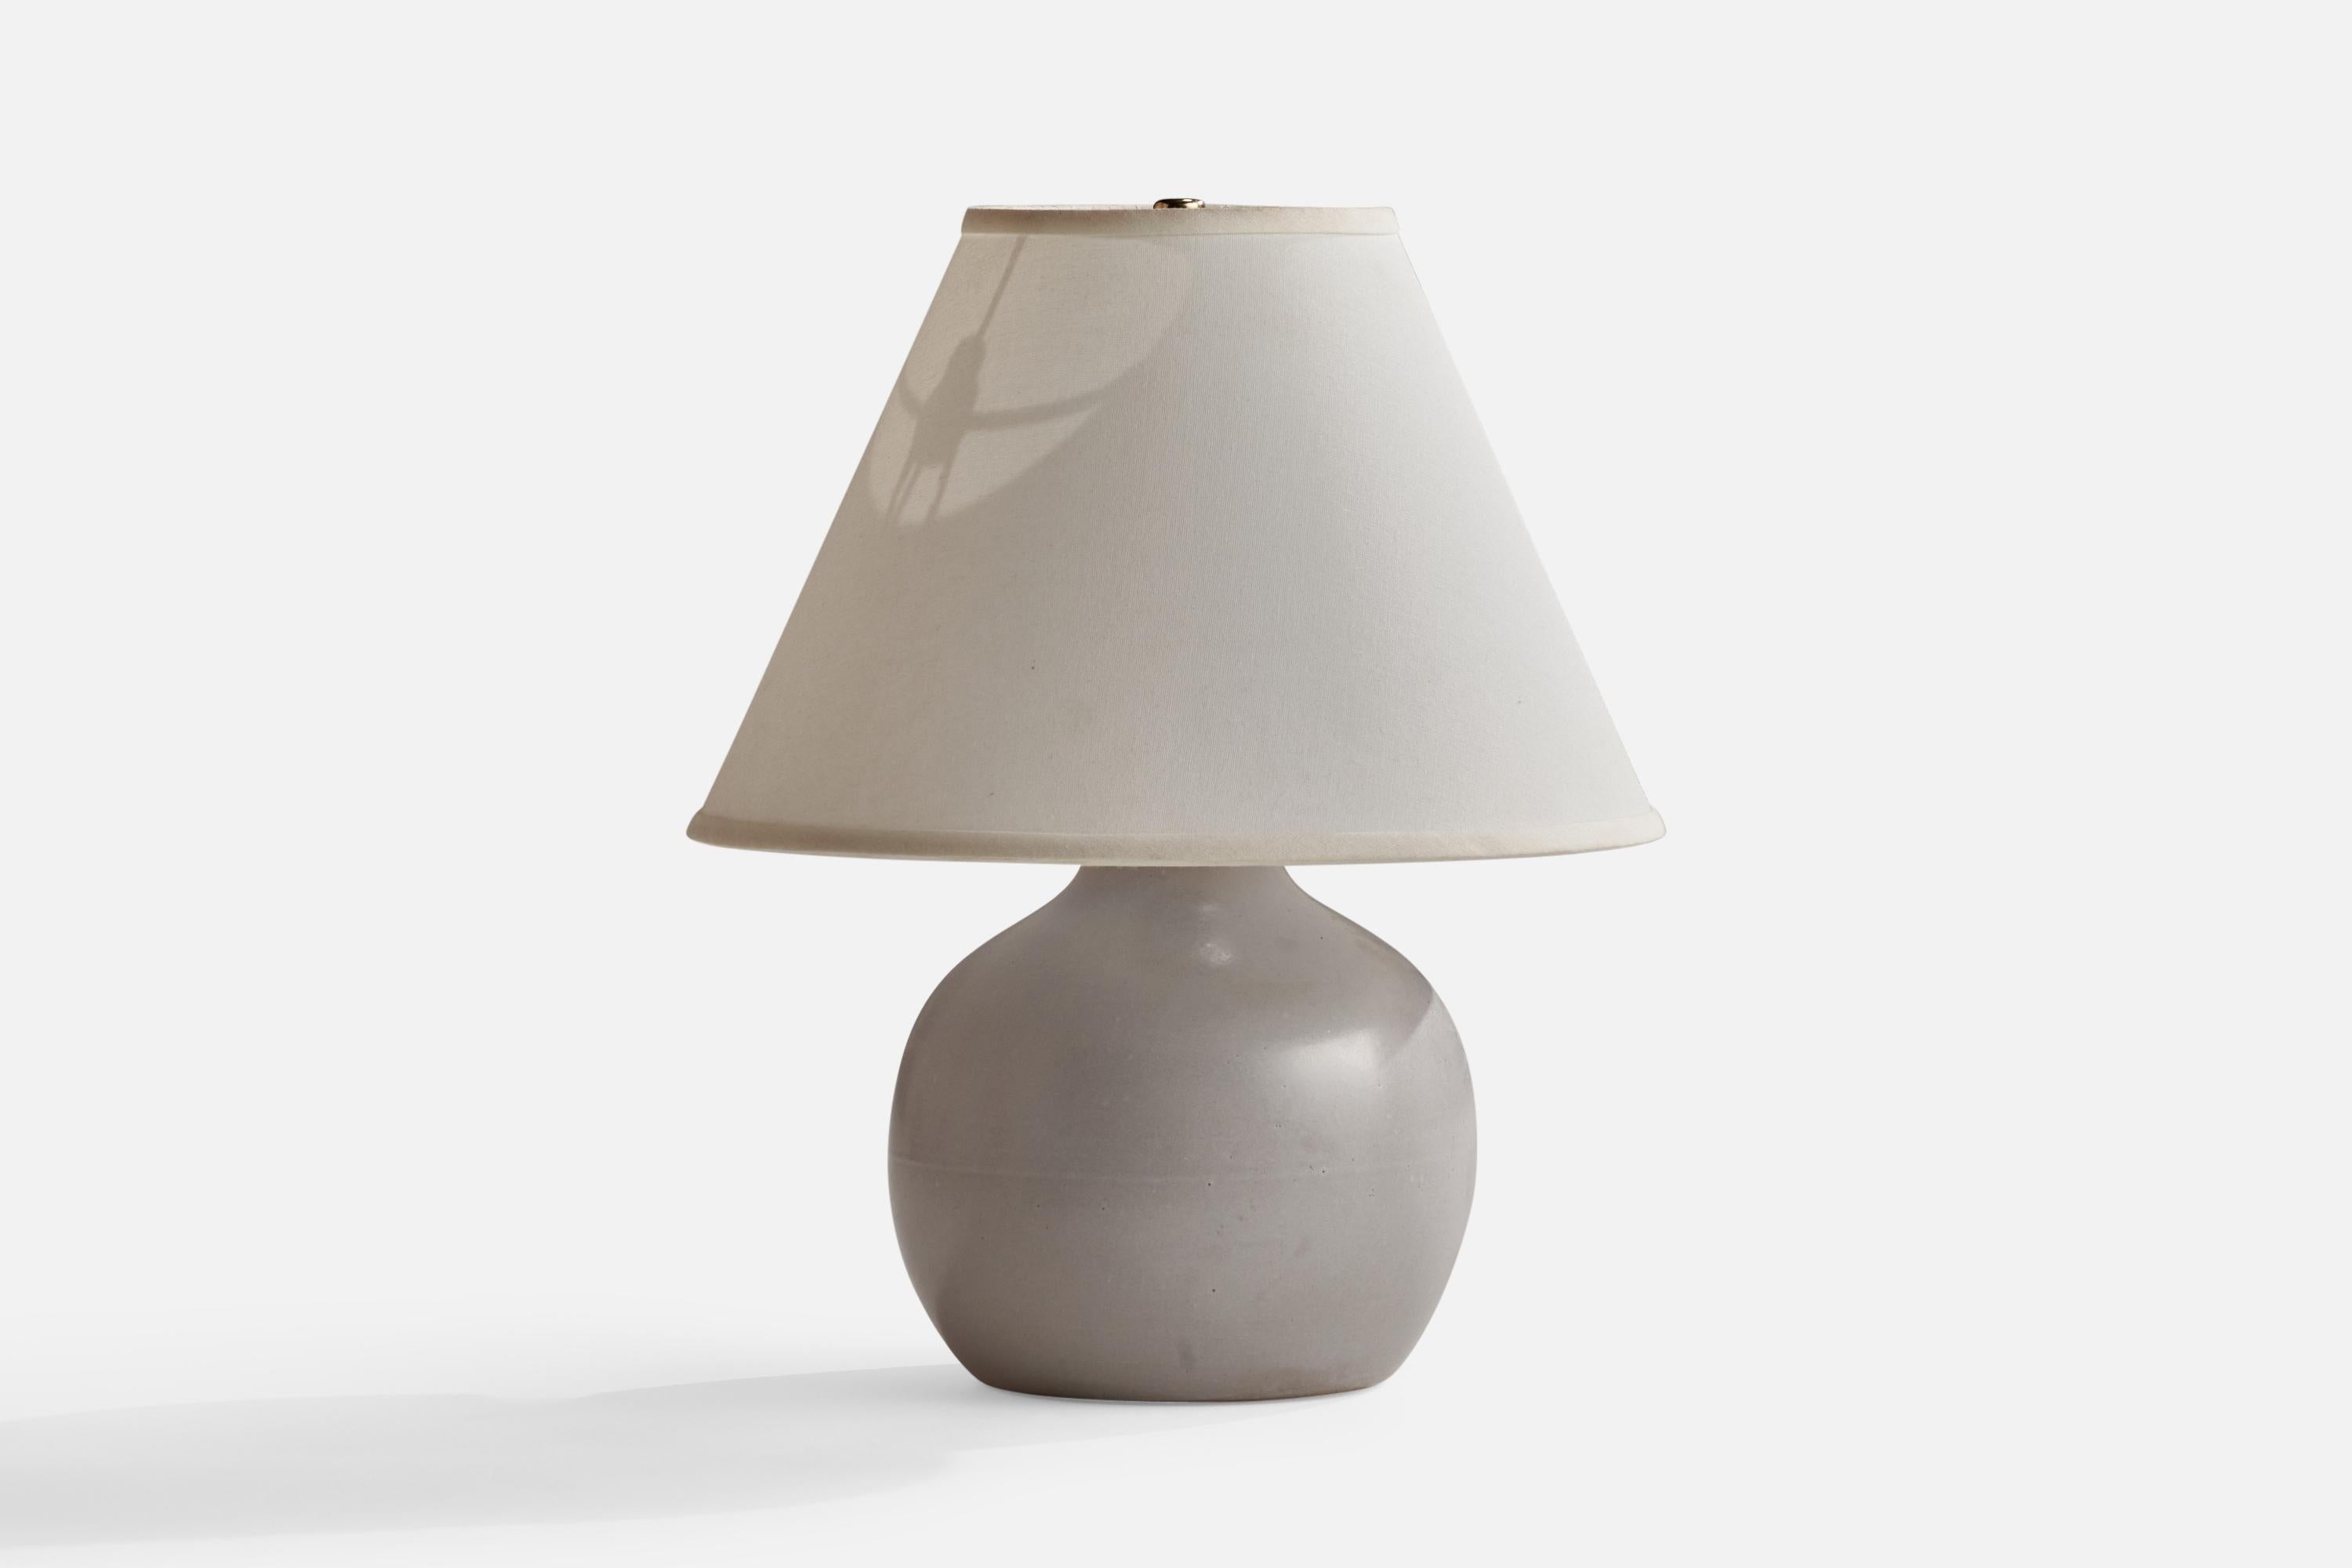 A grey-glazed ceramic table lamp designed by Jane & Gordon Martz and produced by Marshall Studios, USA, 1960s.

Overall Dimensions (inches): 14.5” H x 11.5” W x 7” D
Stated dimensions include shade.
Bulb Specifications: E-26 Bulb
Number of Sockets: